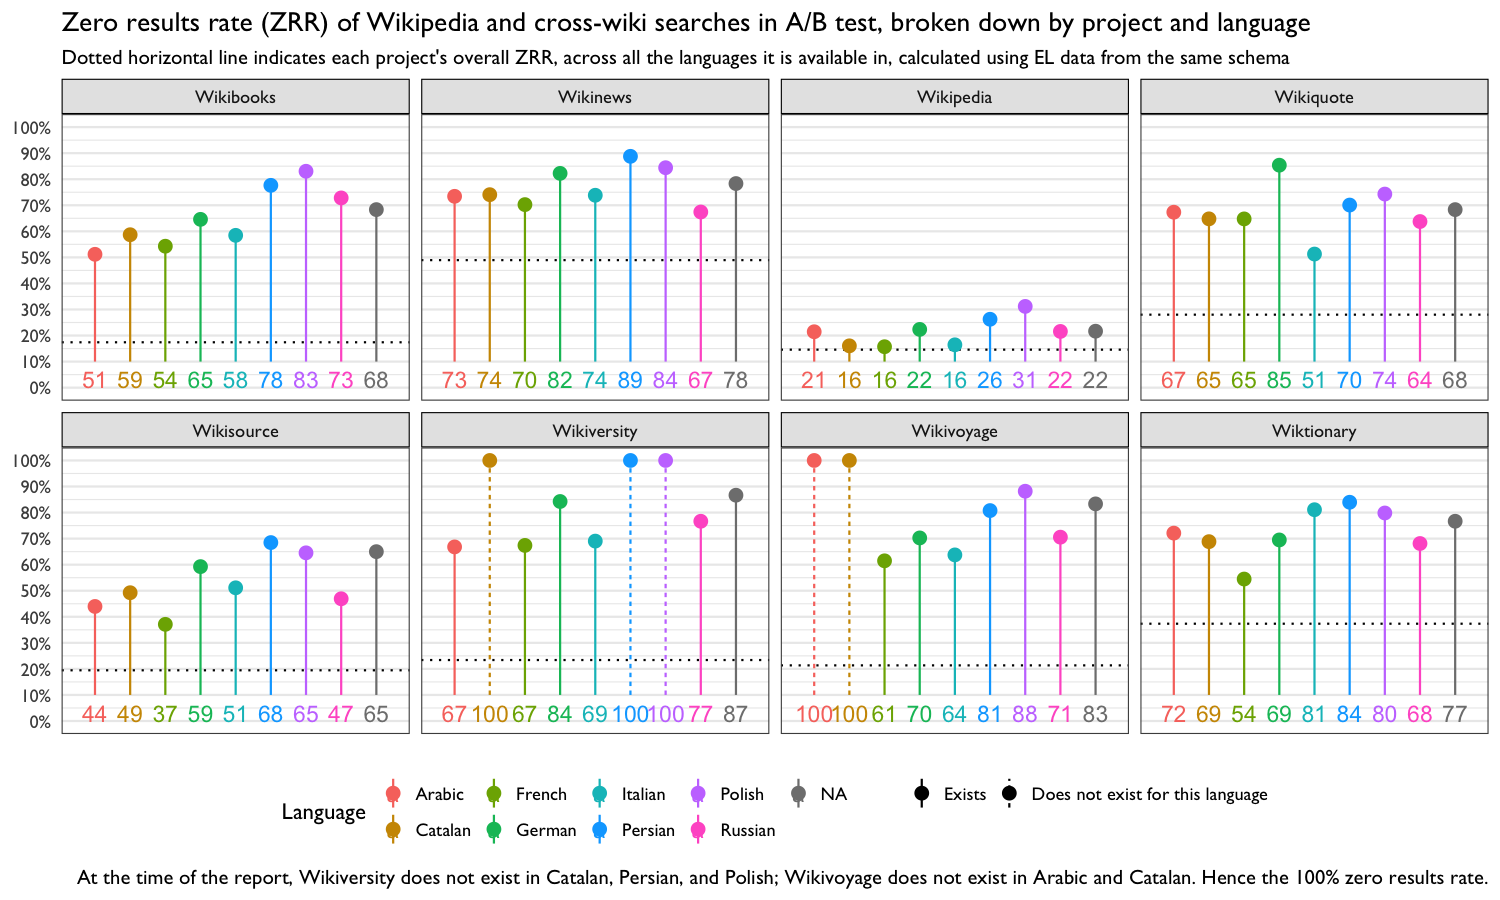 **Figure 4**: The proportion of searches that yielded zero results was the lowest for Wikipedia and Wikisource, with the other projects having very high zero result rates. The ZRR was calculated using back-end search logs, which included searches from controls. To control for lag, we performed cross-wiki searches for everyone in the A/B test, regardless of group membership.